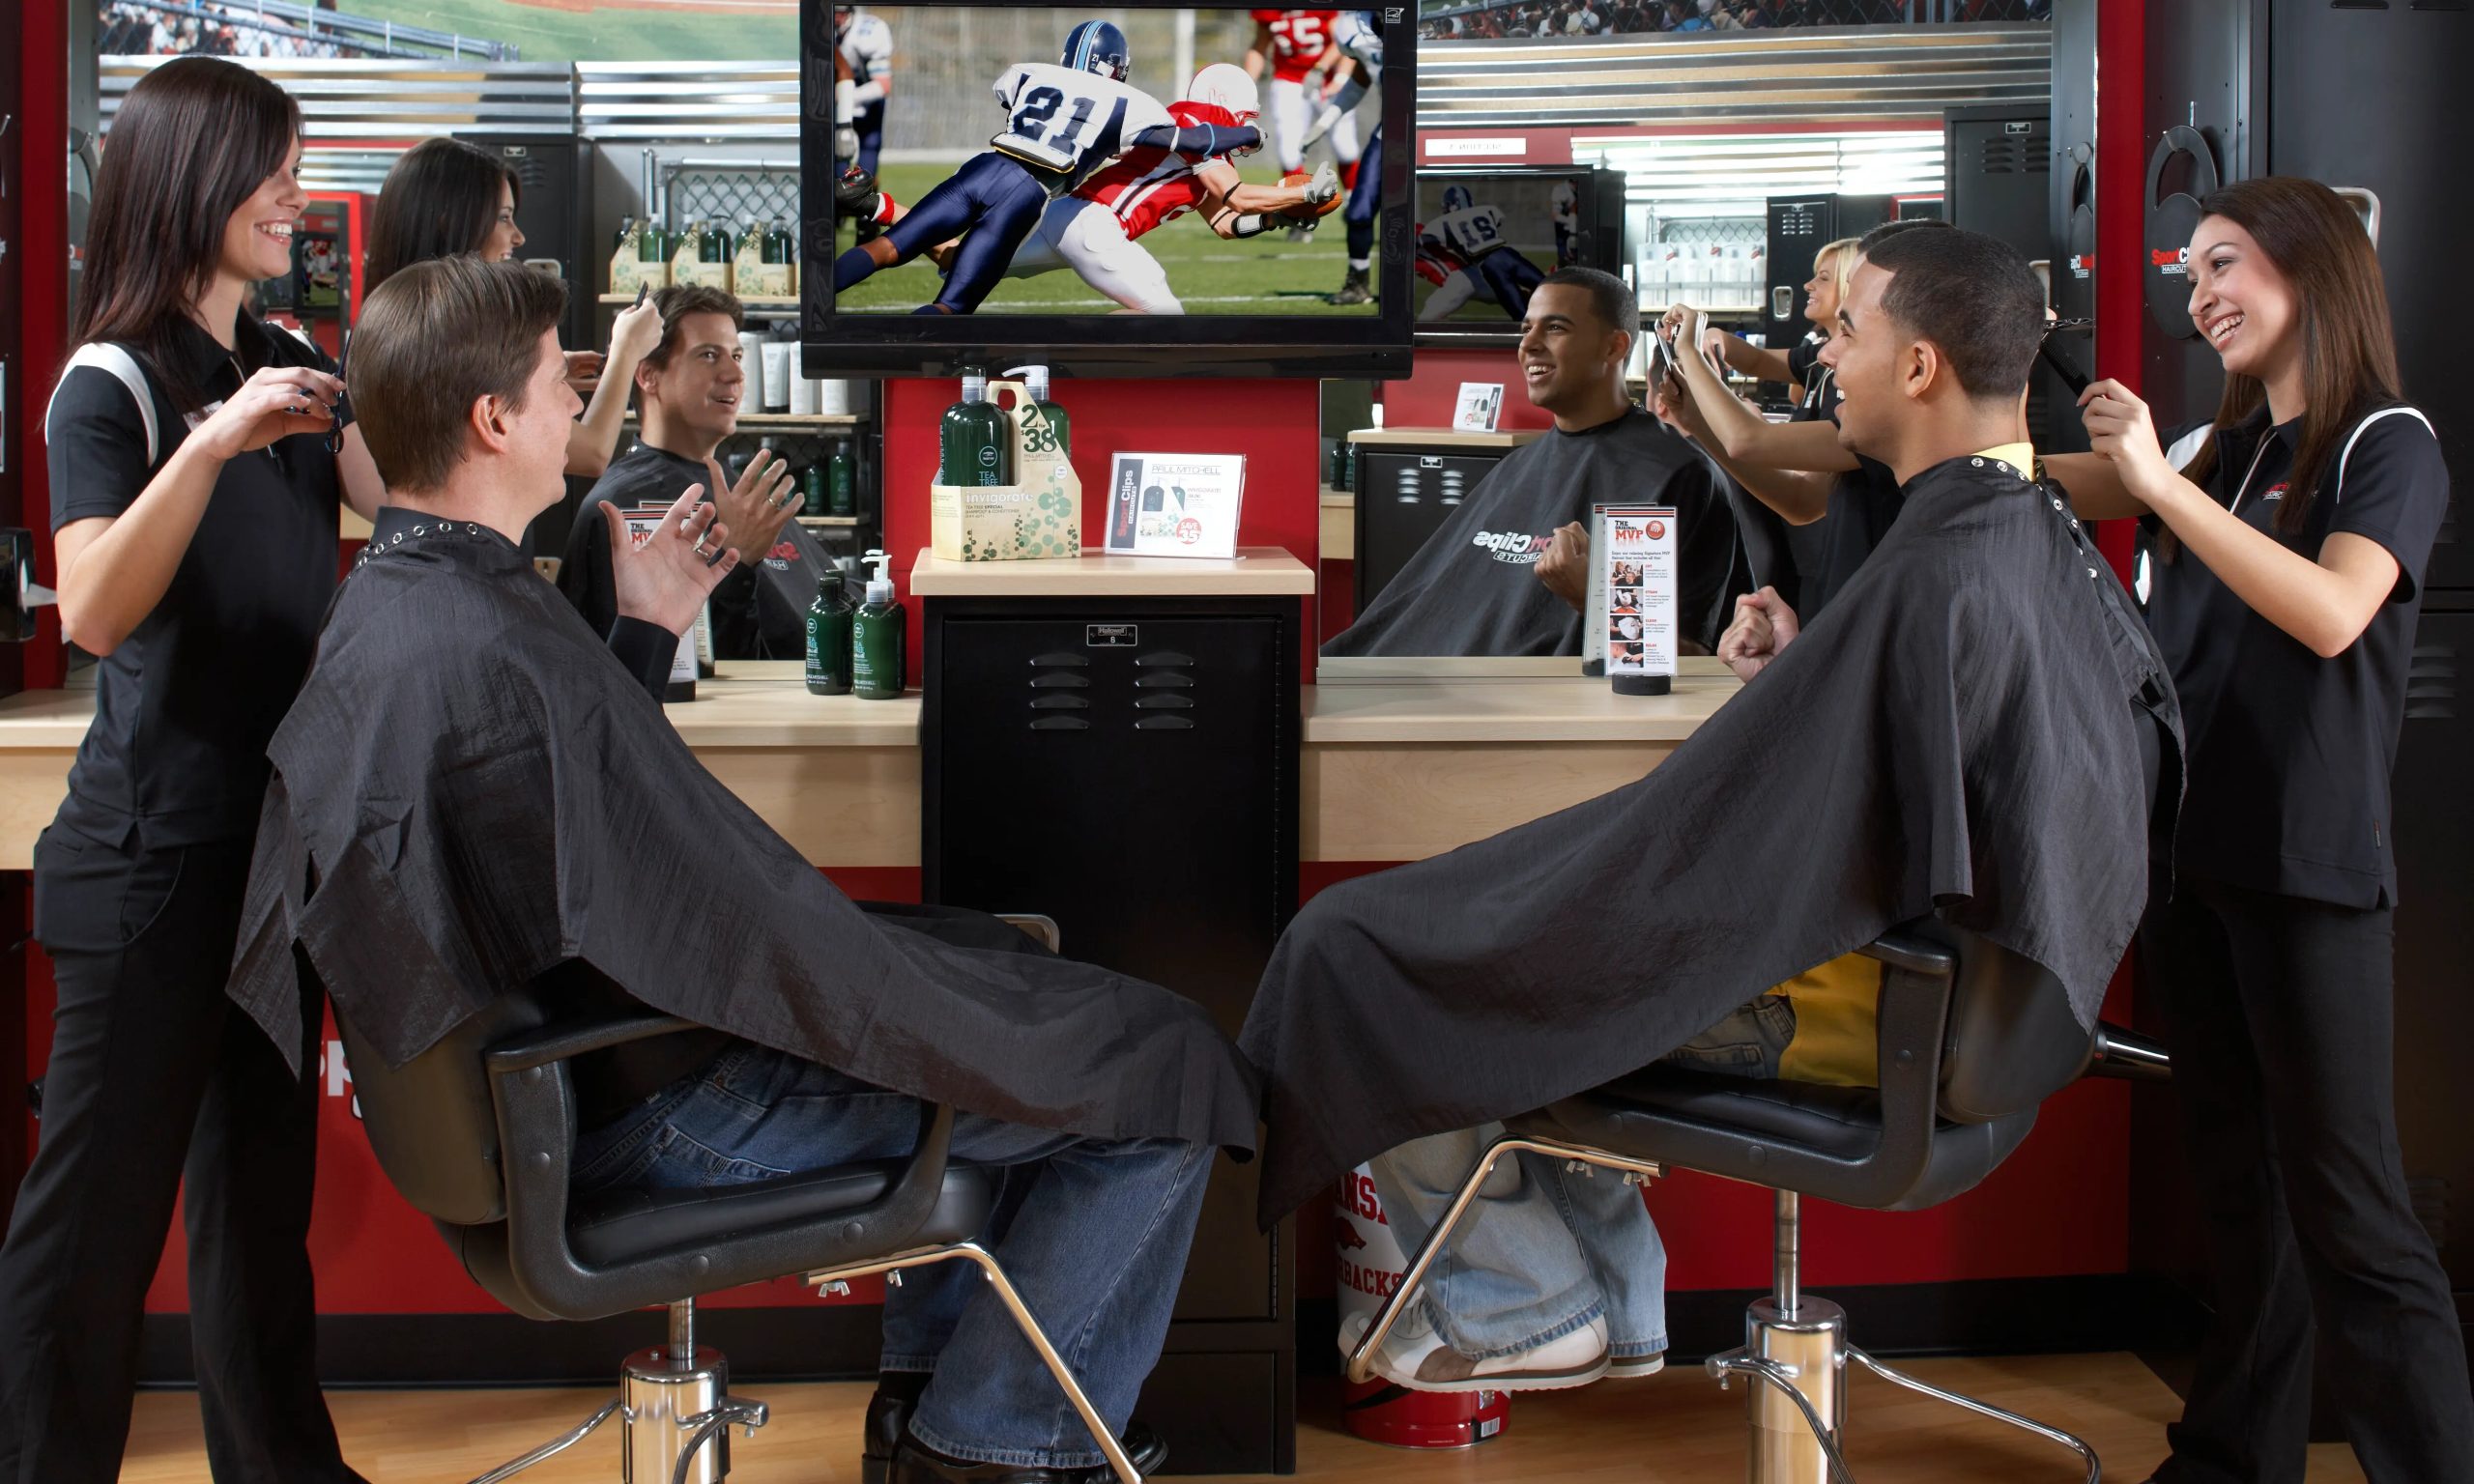 Interior of a Sports Clips salon with modern barber chairs and sports-themed decor.